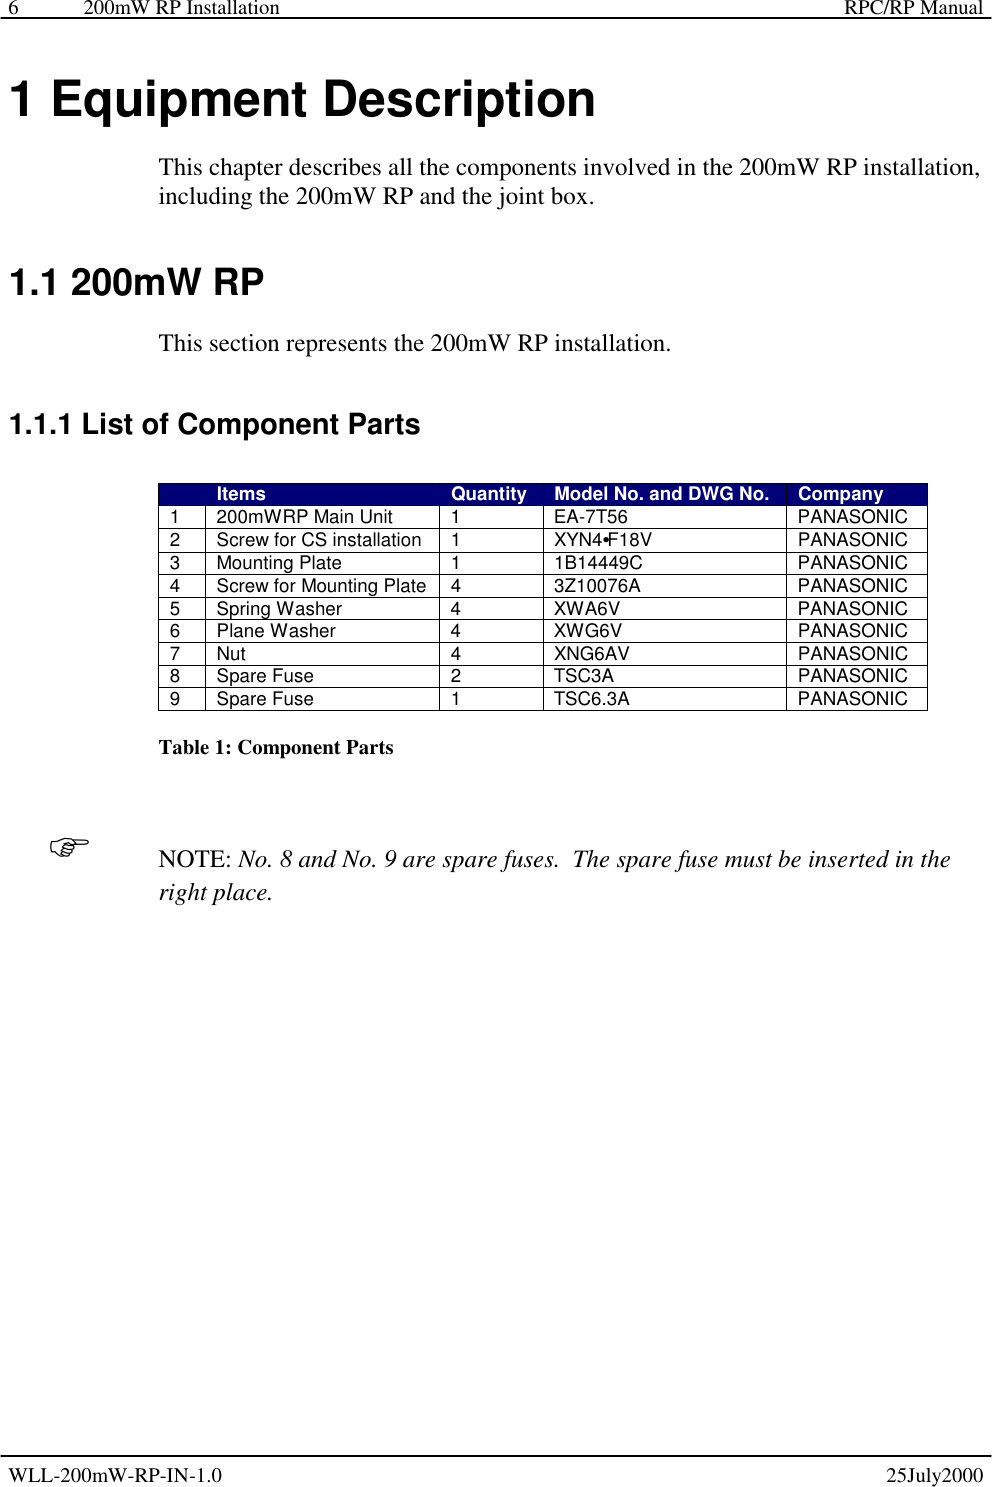 200mW RP Installation    RPC/RP Manual WLL-200mW-RP-IN-1.0   25July2000 6 1 Equipment Description This chapter describes all the components involved in the 200mW RP installation, including the 200mW RP and the joint box.  1.1 200mW RP This section represents the 200mW RP installation. 1.1.1 List of Component Parts  Items  Quantity  Model No. and DWG No.  Company 1  200mWRP Main Unit  1  EA-7T56  PANASONIC 2  Screw for CS installation  1  XYN4•F18V PANASONIC 3 Mounting Plate  1  1B14449C  PANASONIC 4  Screw for Mounting Plate  4  3Z10076A  PANASONIC 5 Spring Washer  4  XWA6V  PANASONIC 6 Plane Washer  4  XWG6V  PANASONIC 7 Nut  4  XNG6AV  PANASONIC 8 Spare Fuse  2  TSC3A  PANASONIC 9 Spare Fuse  1  TSC6.3A  PANASONIC Table 1: Component Parts ! NOTE: No. 8 and No. 9 are spare fuses.  The spare fuse must be inserted in the right place. 